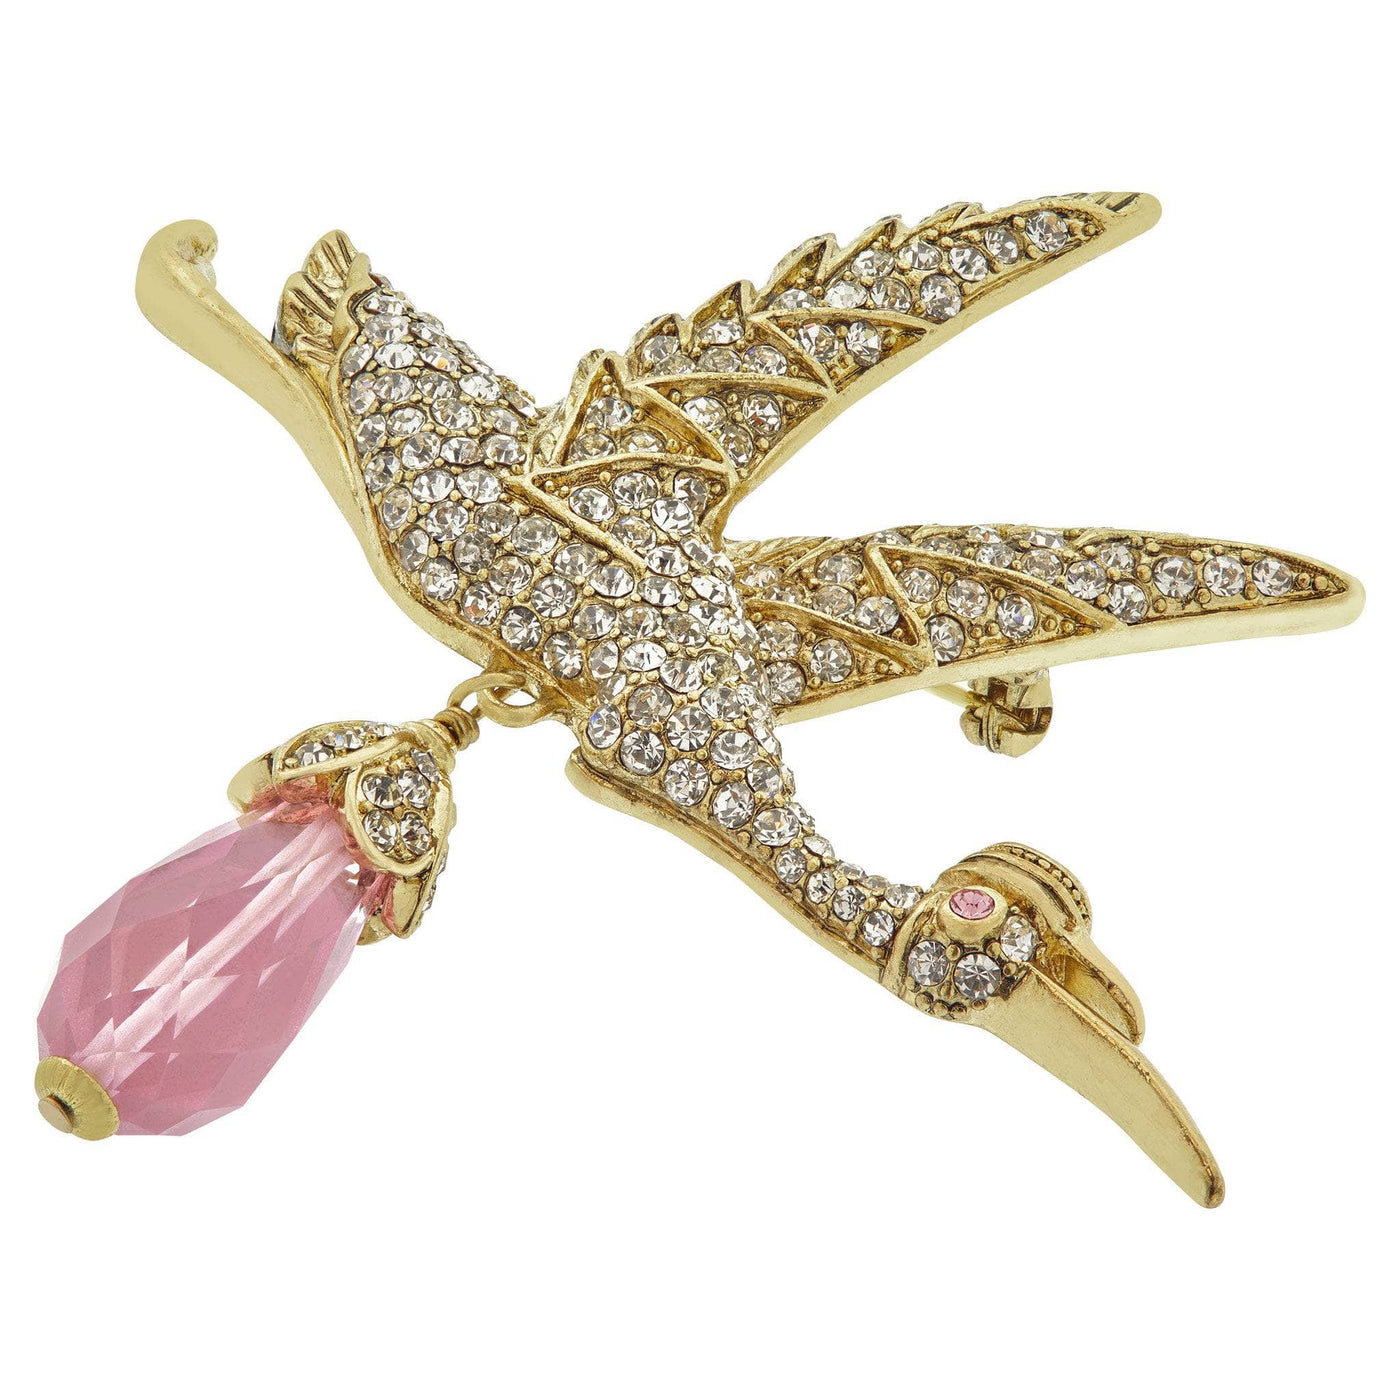 HEIDI DAUS®"A Very Special Delivery" Beaded Crystal Stork Pin